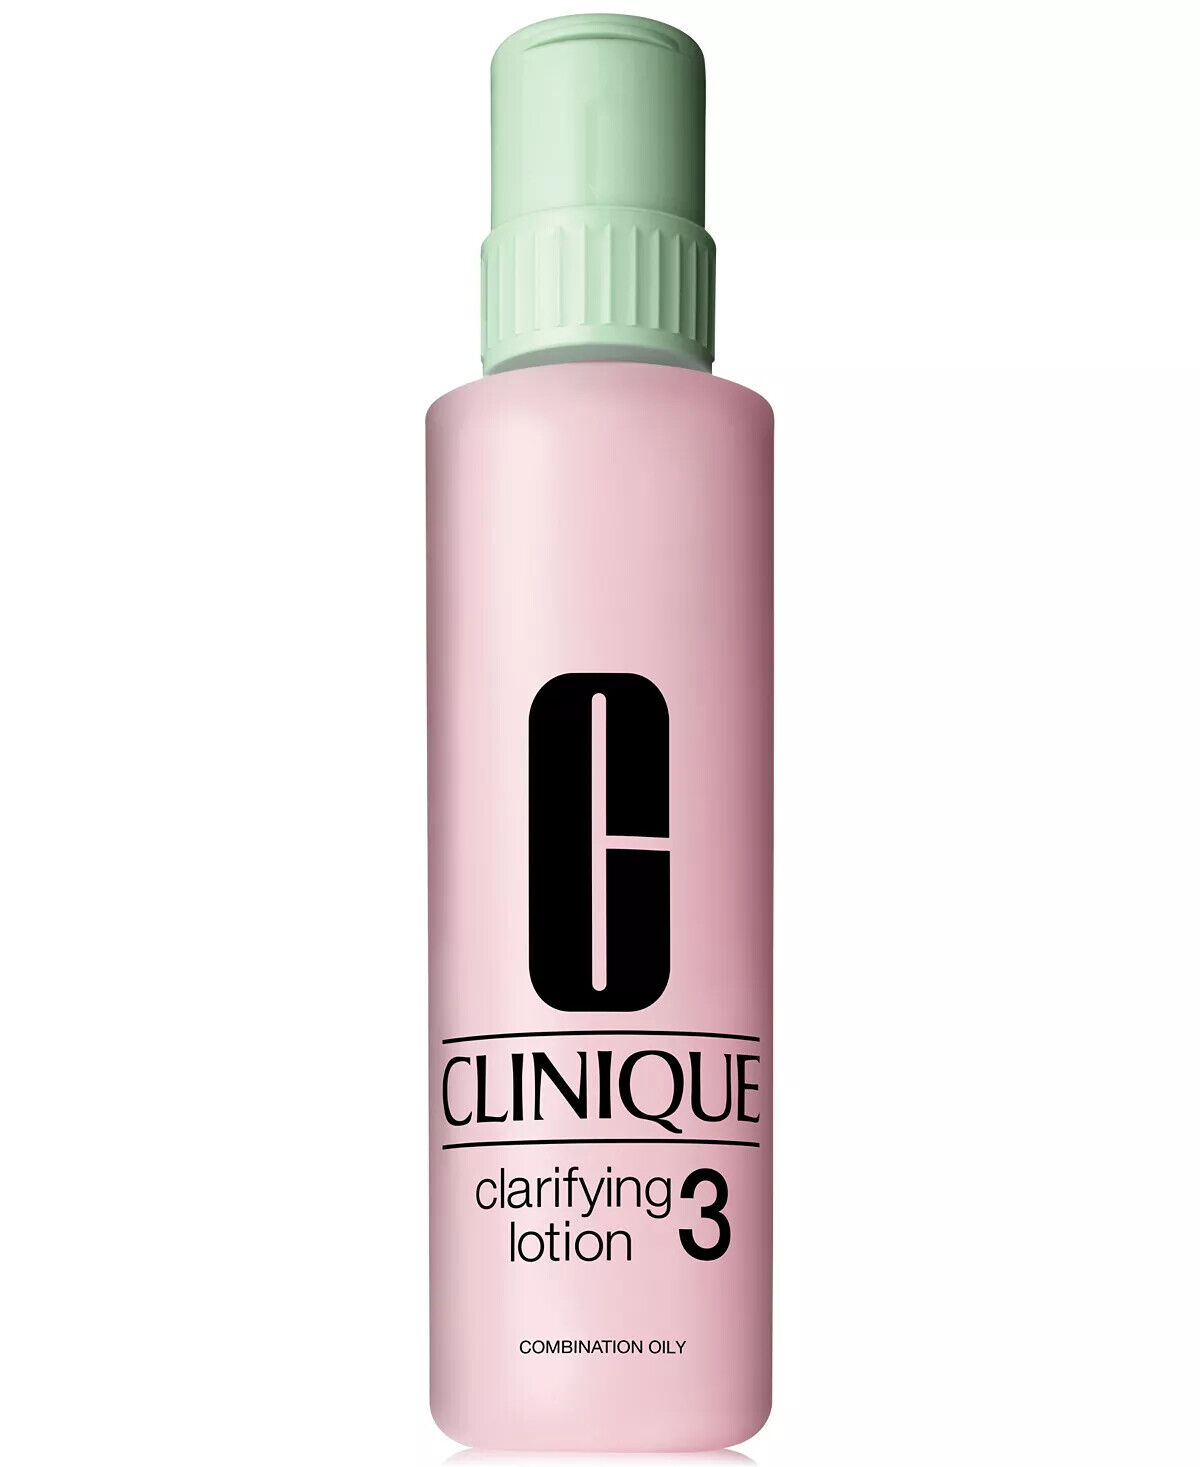 Clinique Clarifying Lotion #3 Jumbo Combination Oily 16.5 oz/487 ml with Pump